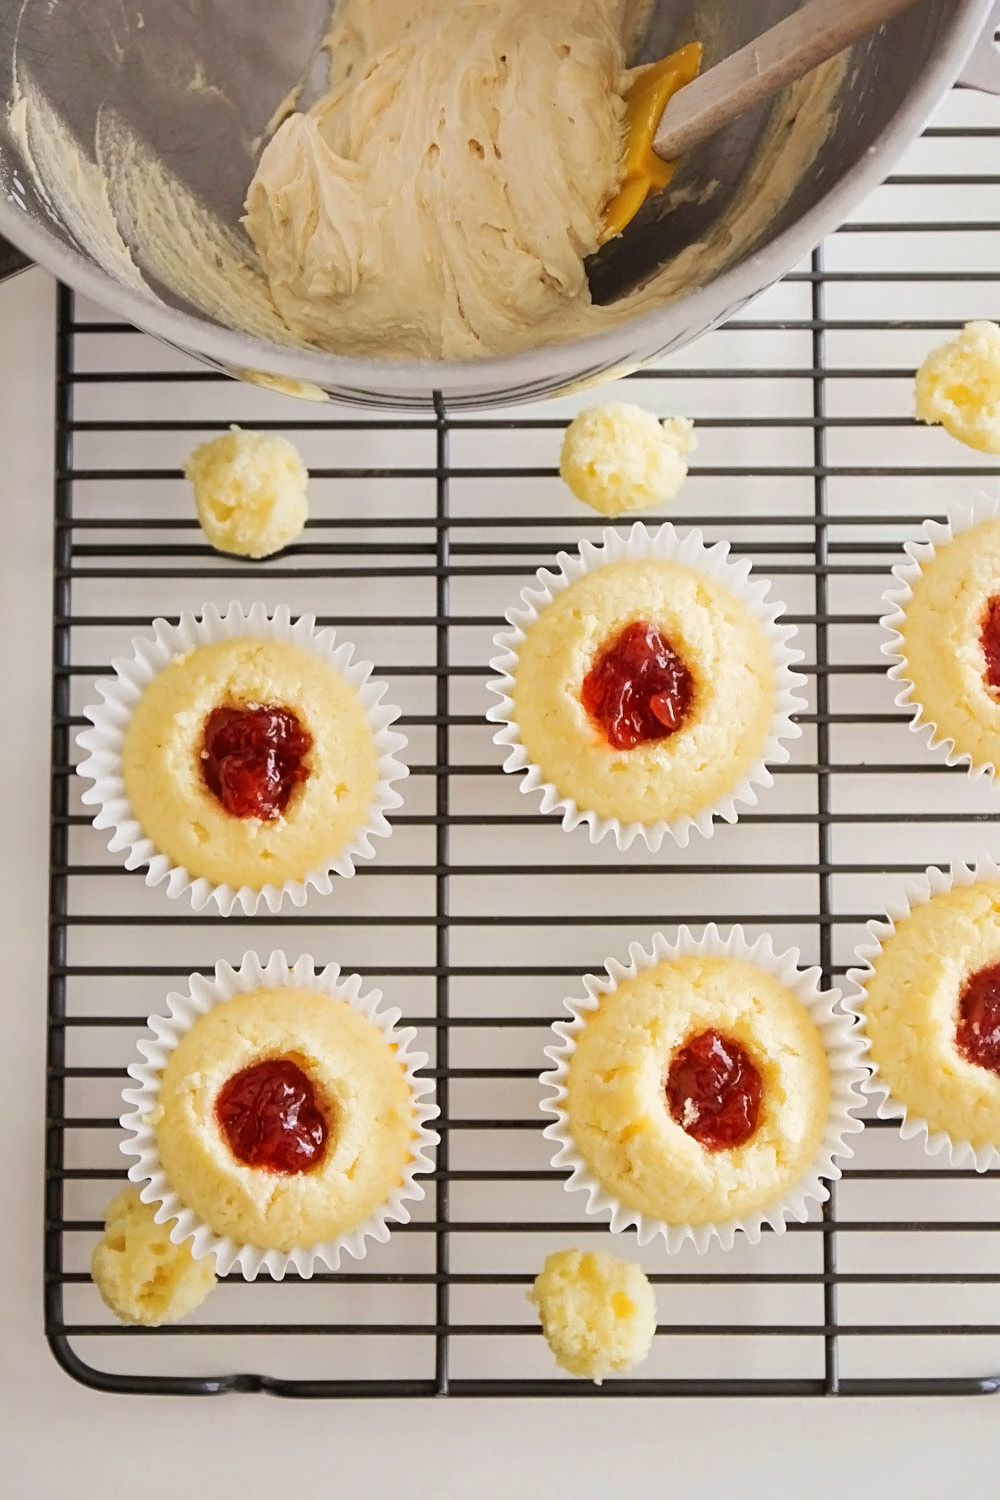 These peanut butter and jelly cupcakes are so fun and delicious! Tender white cake filled with strawberry jam and topped with a delicious peanut butter buttercream. Yum!